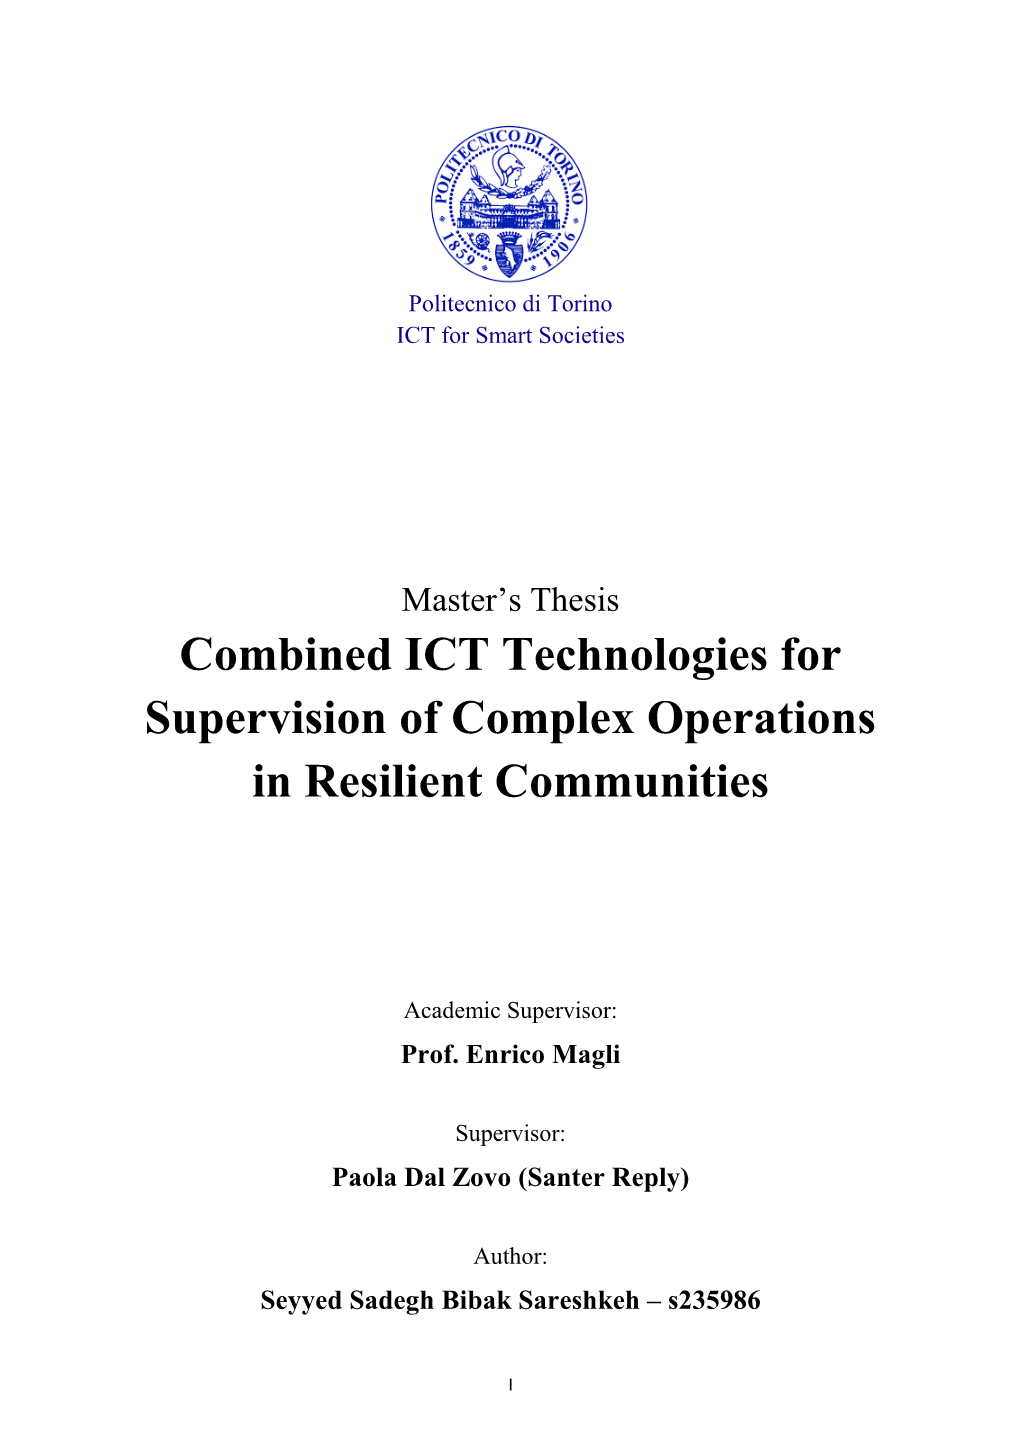 Combined ICT Technologies for Supervision of Complex Operations in Resilient Communities